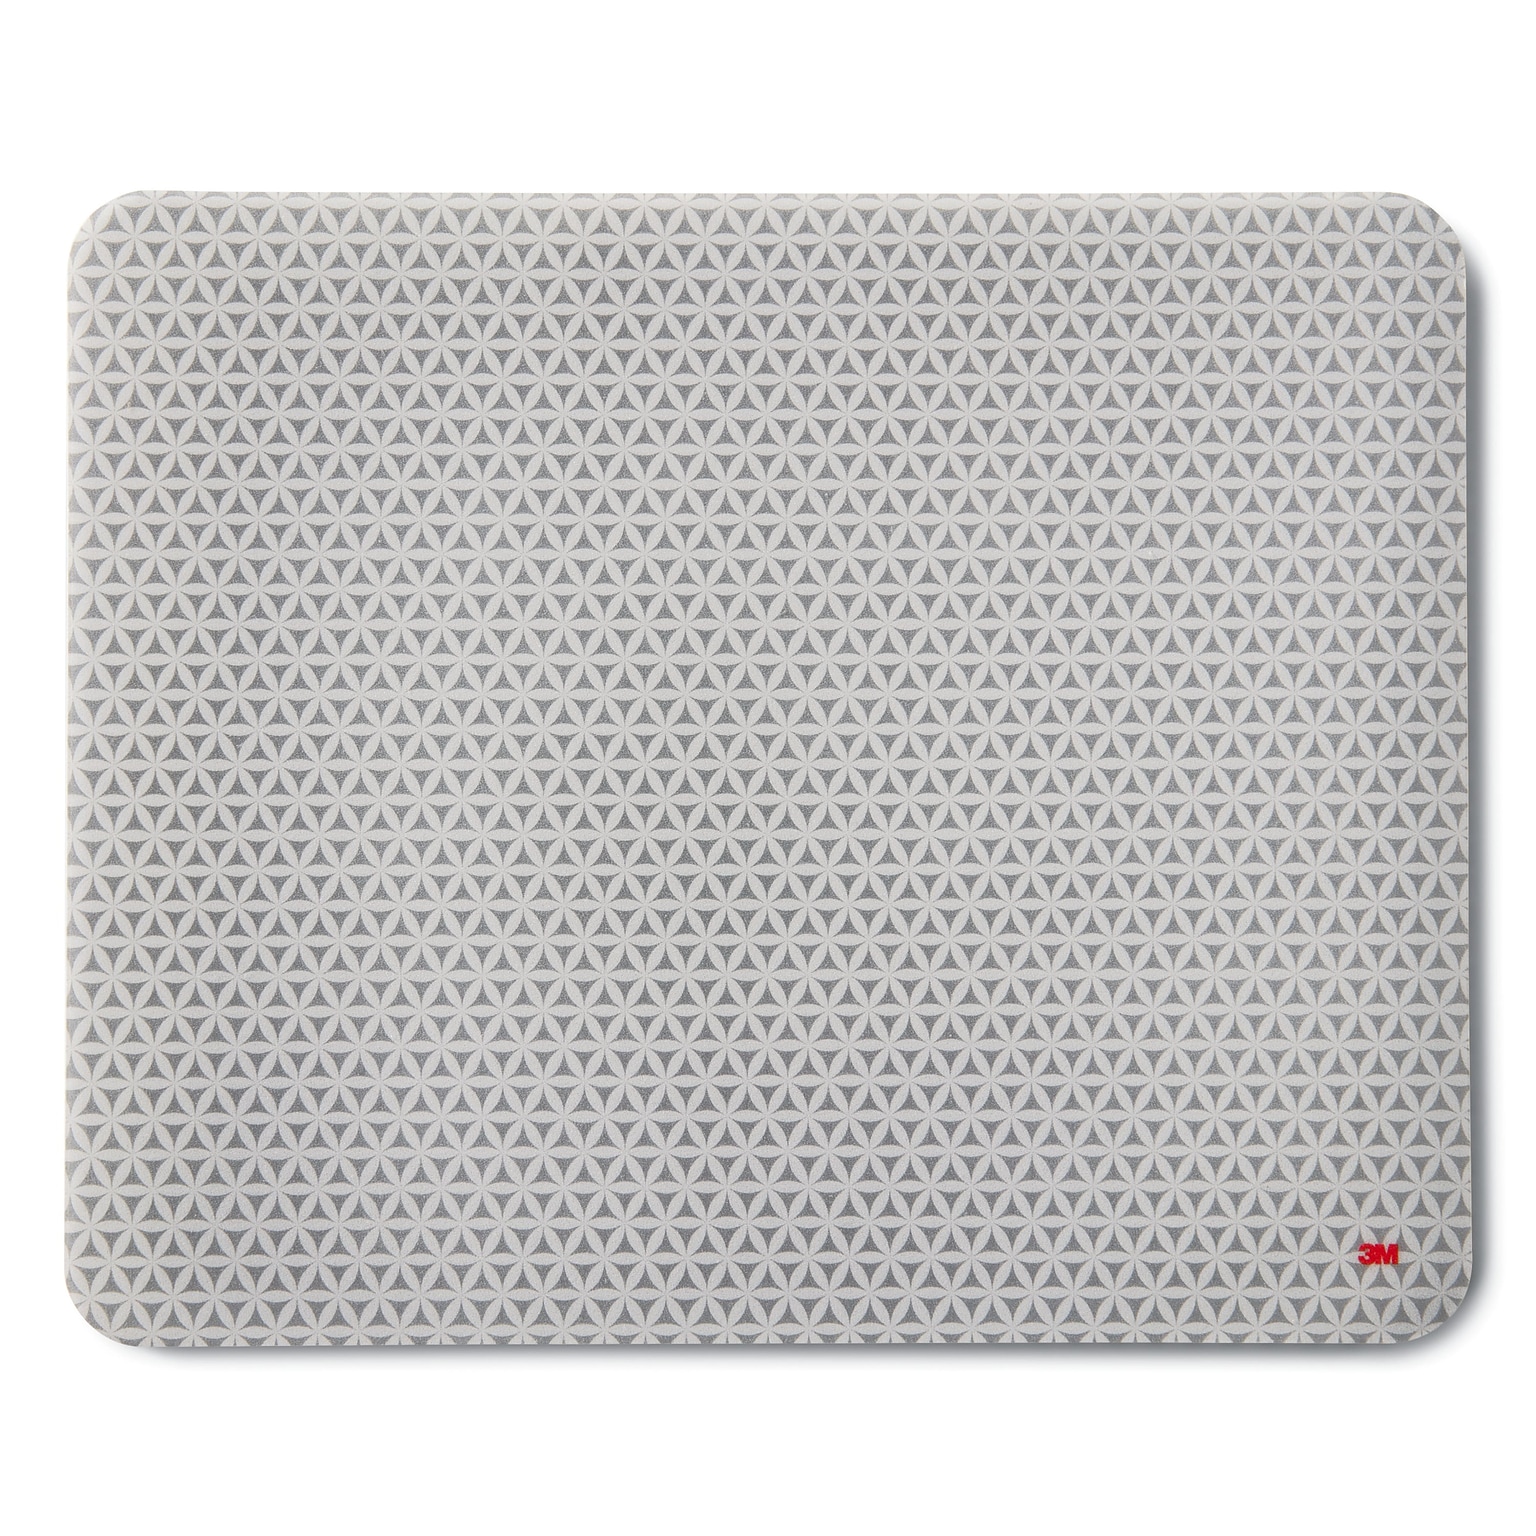 3M™ Precise Bitmap Mouse Pad with Adhesive Back, Non-Skid, Gray (MP200PS)